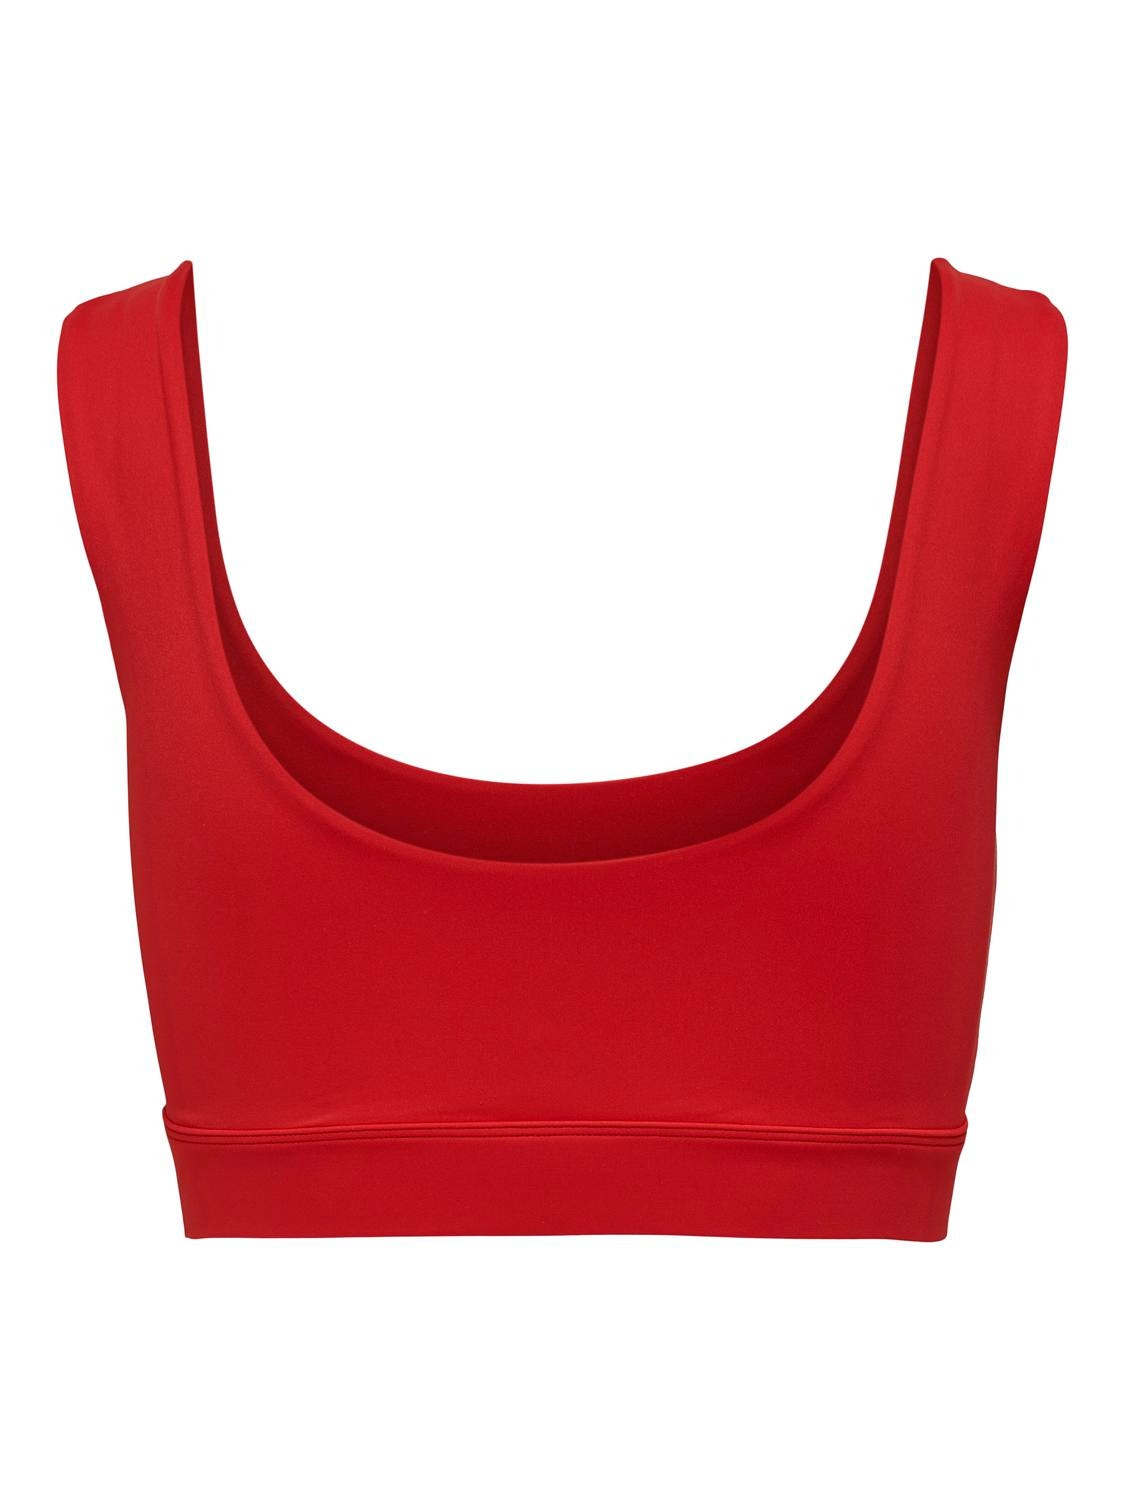 ONLY Bras -Mars Red - 15318935